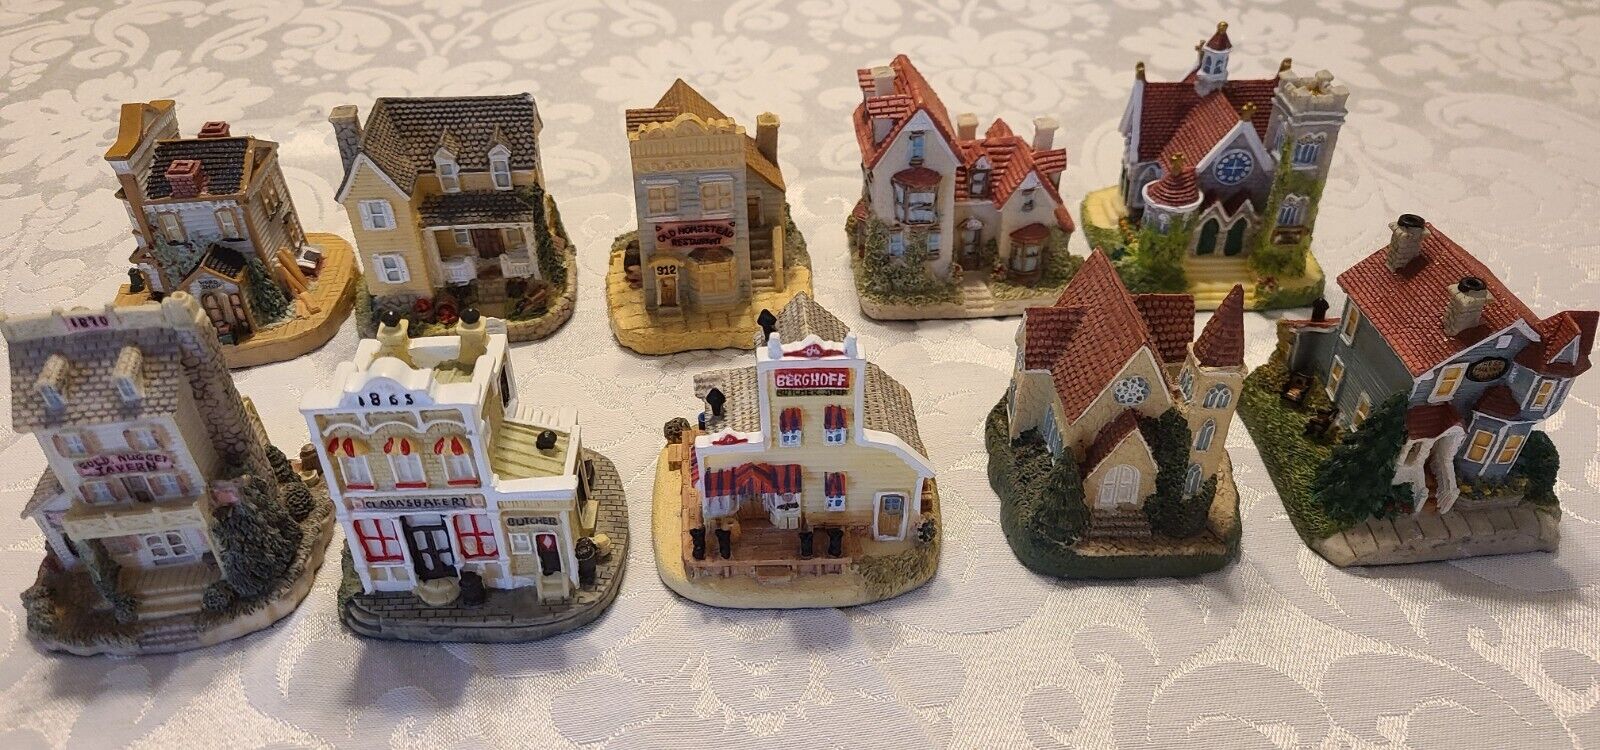 First Lot of 10 international resourcing services Mini Houses